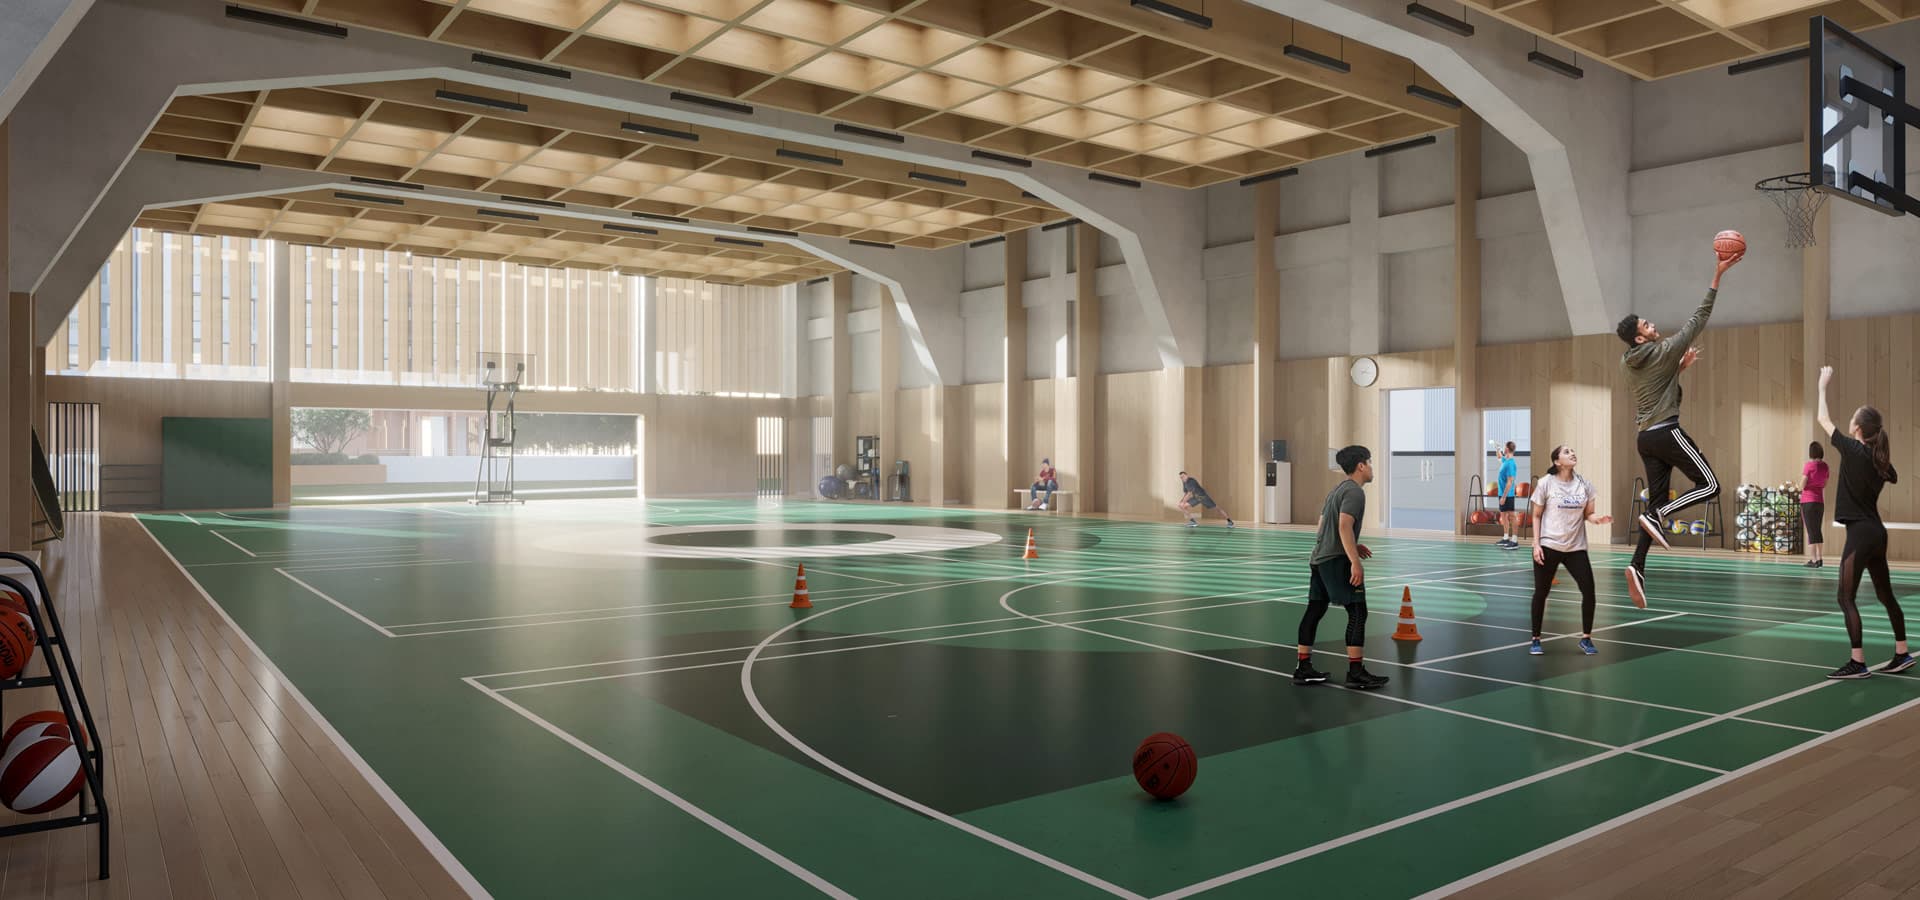 The Arena facility at Piramal Vaikunth for sports and events